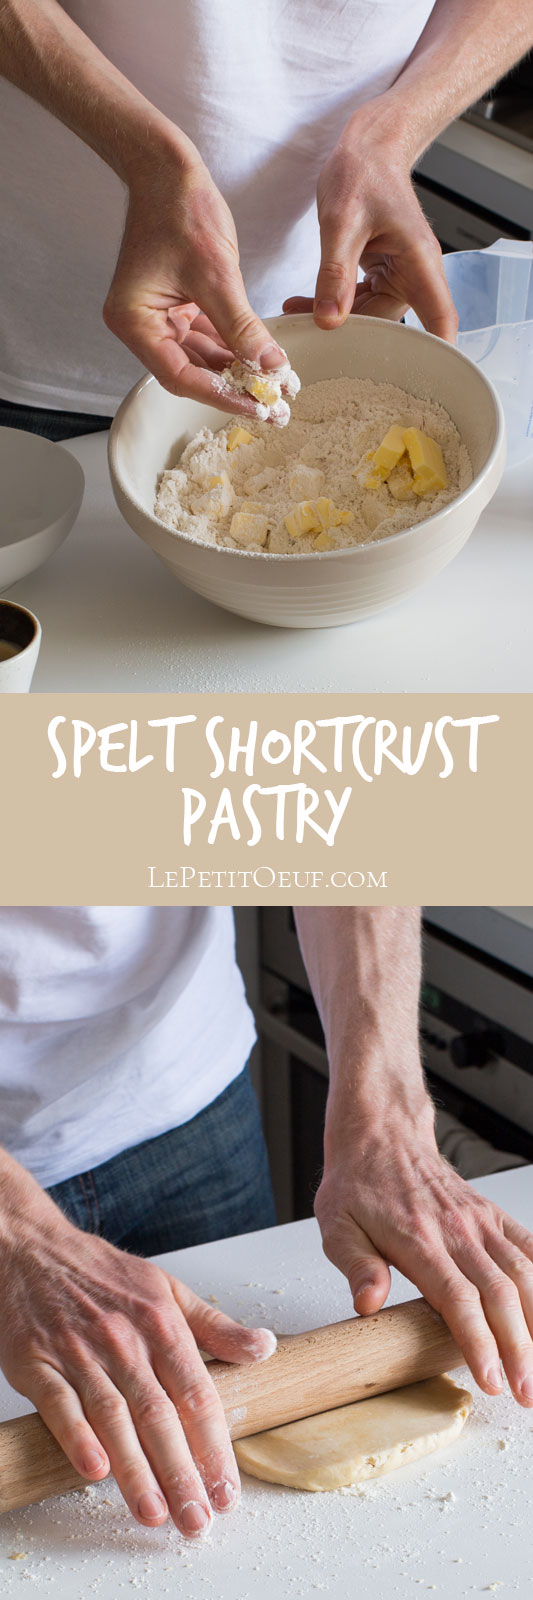 Spelt shortcrust pastry is a basic necessity for any home cook or baker and here's a soft, tender version made using spelt flour.